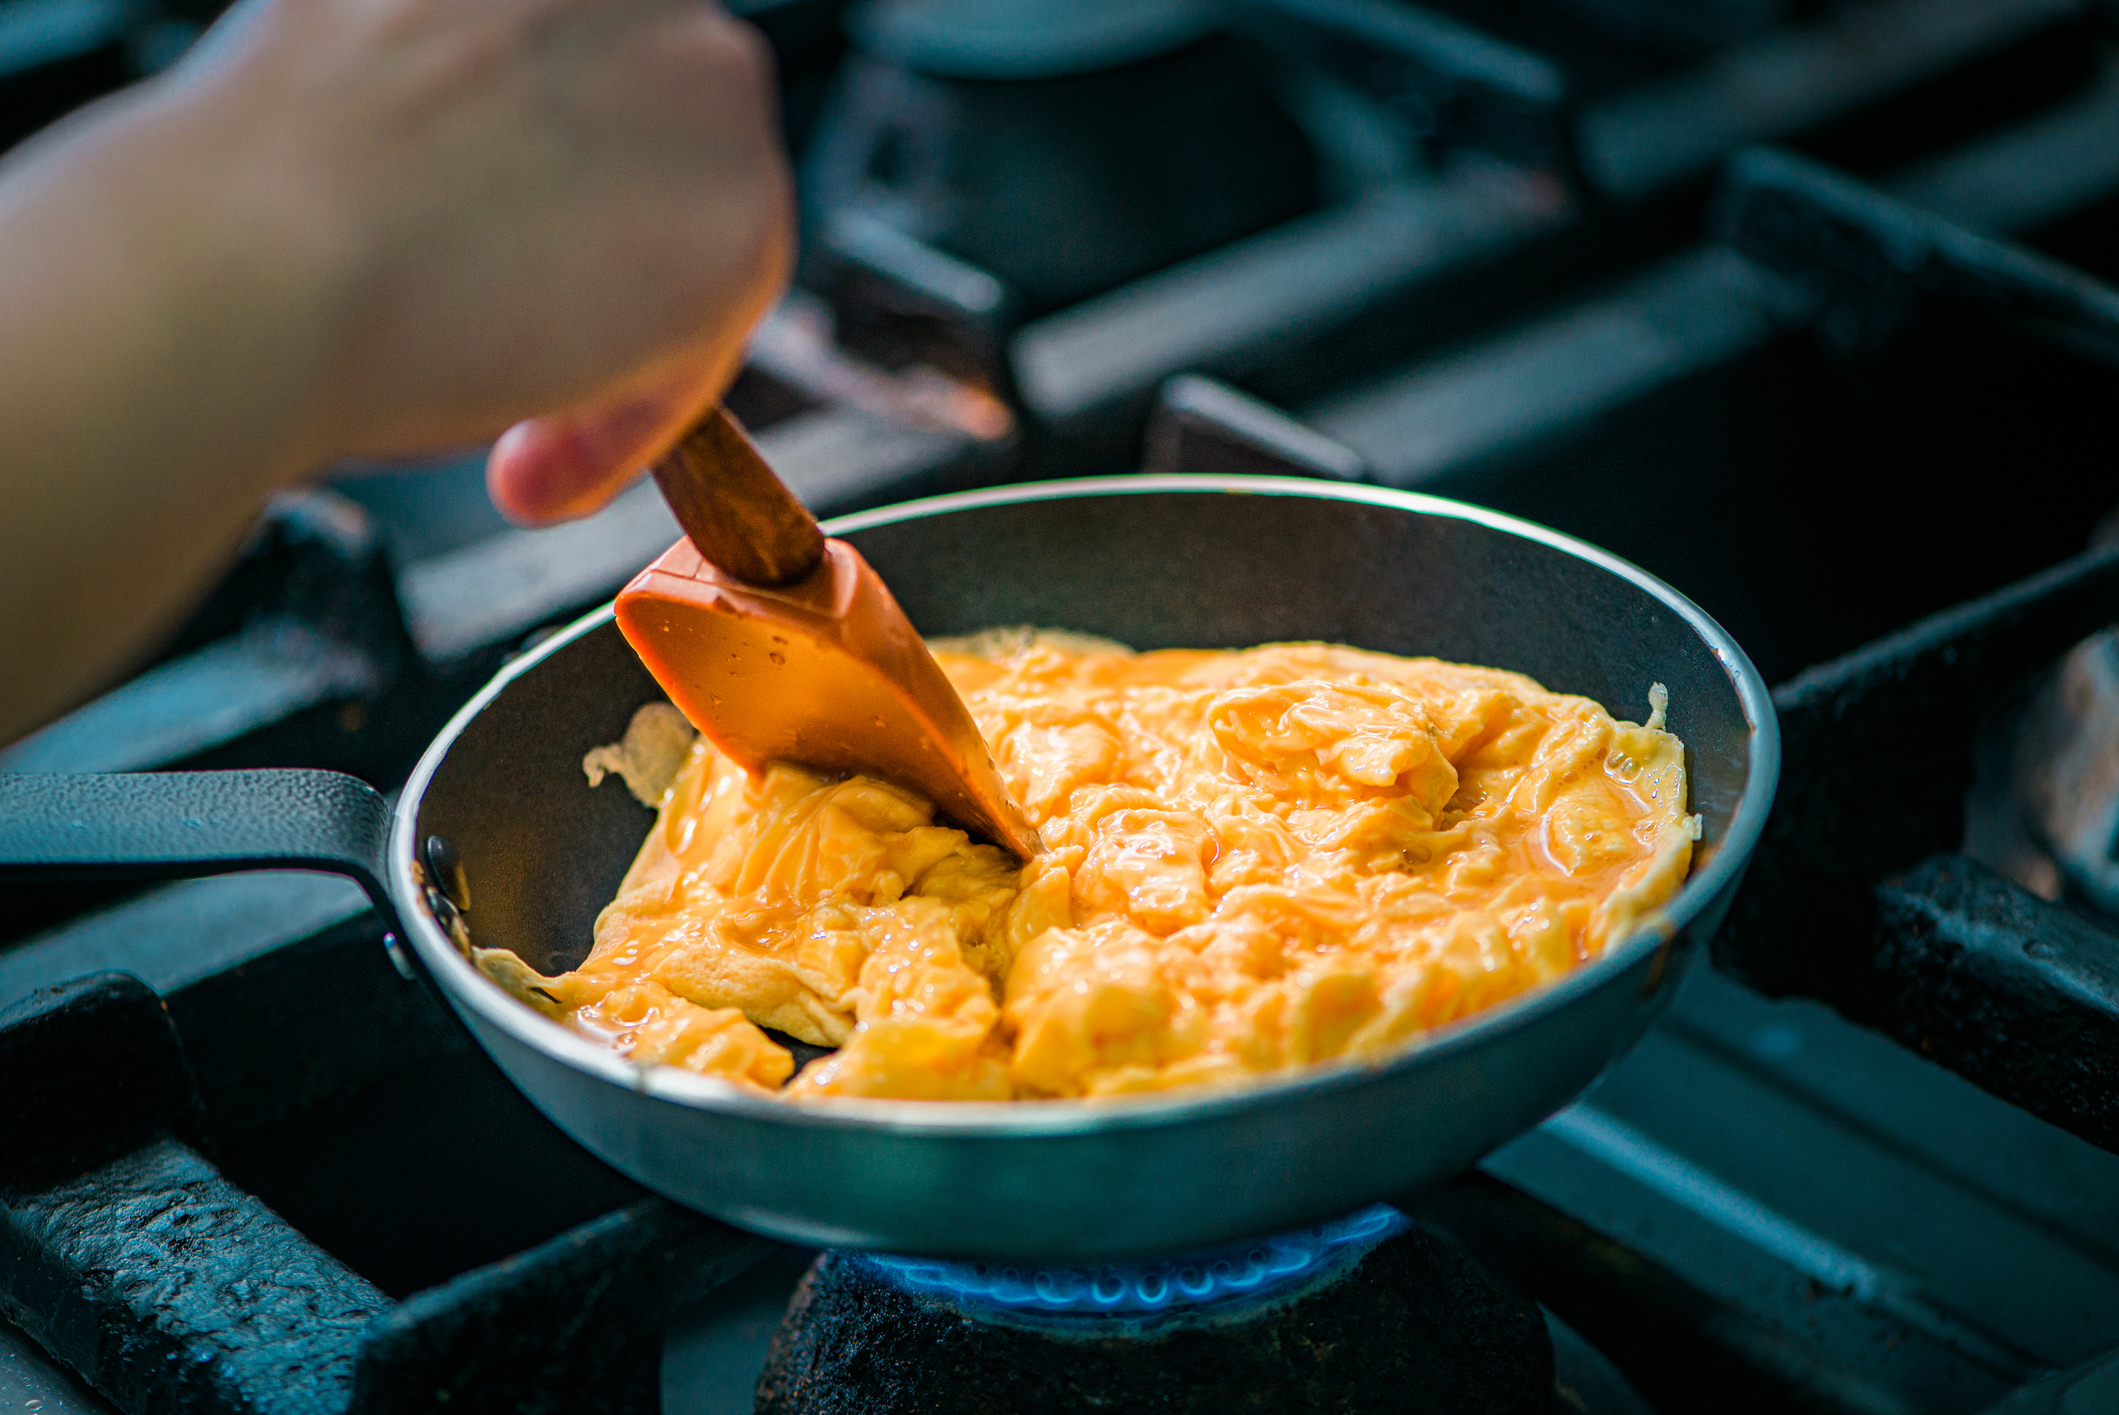 A person is cooking scrambled eggs in a pan on a stove, using a wooden spatula to stir them